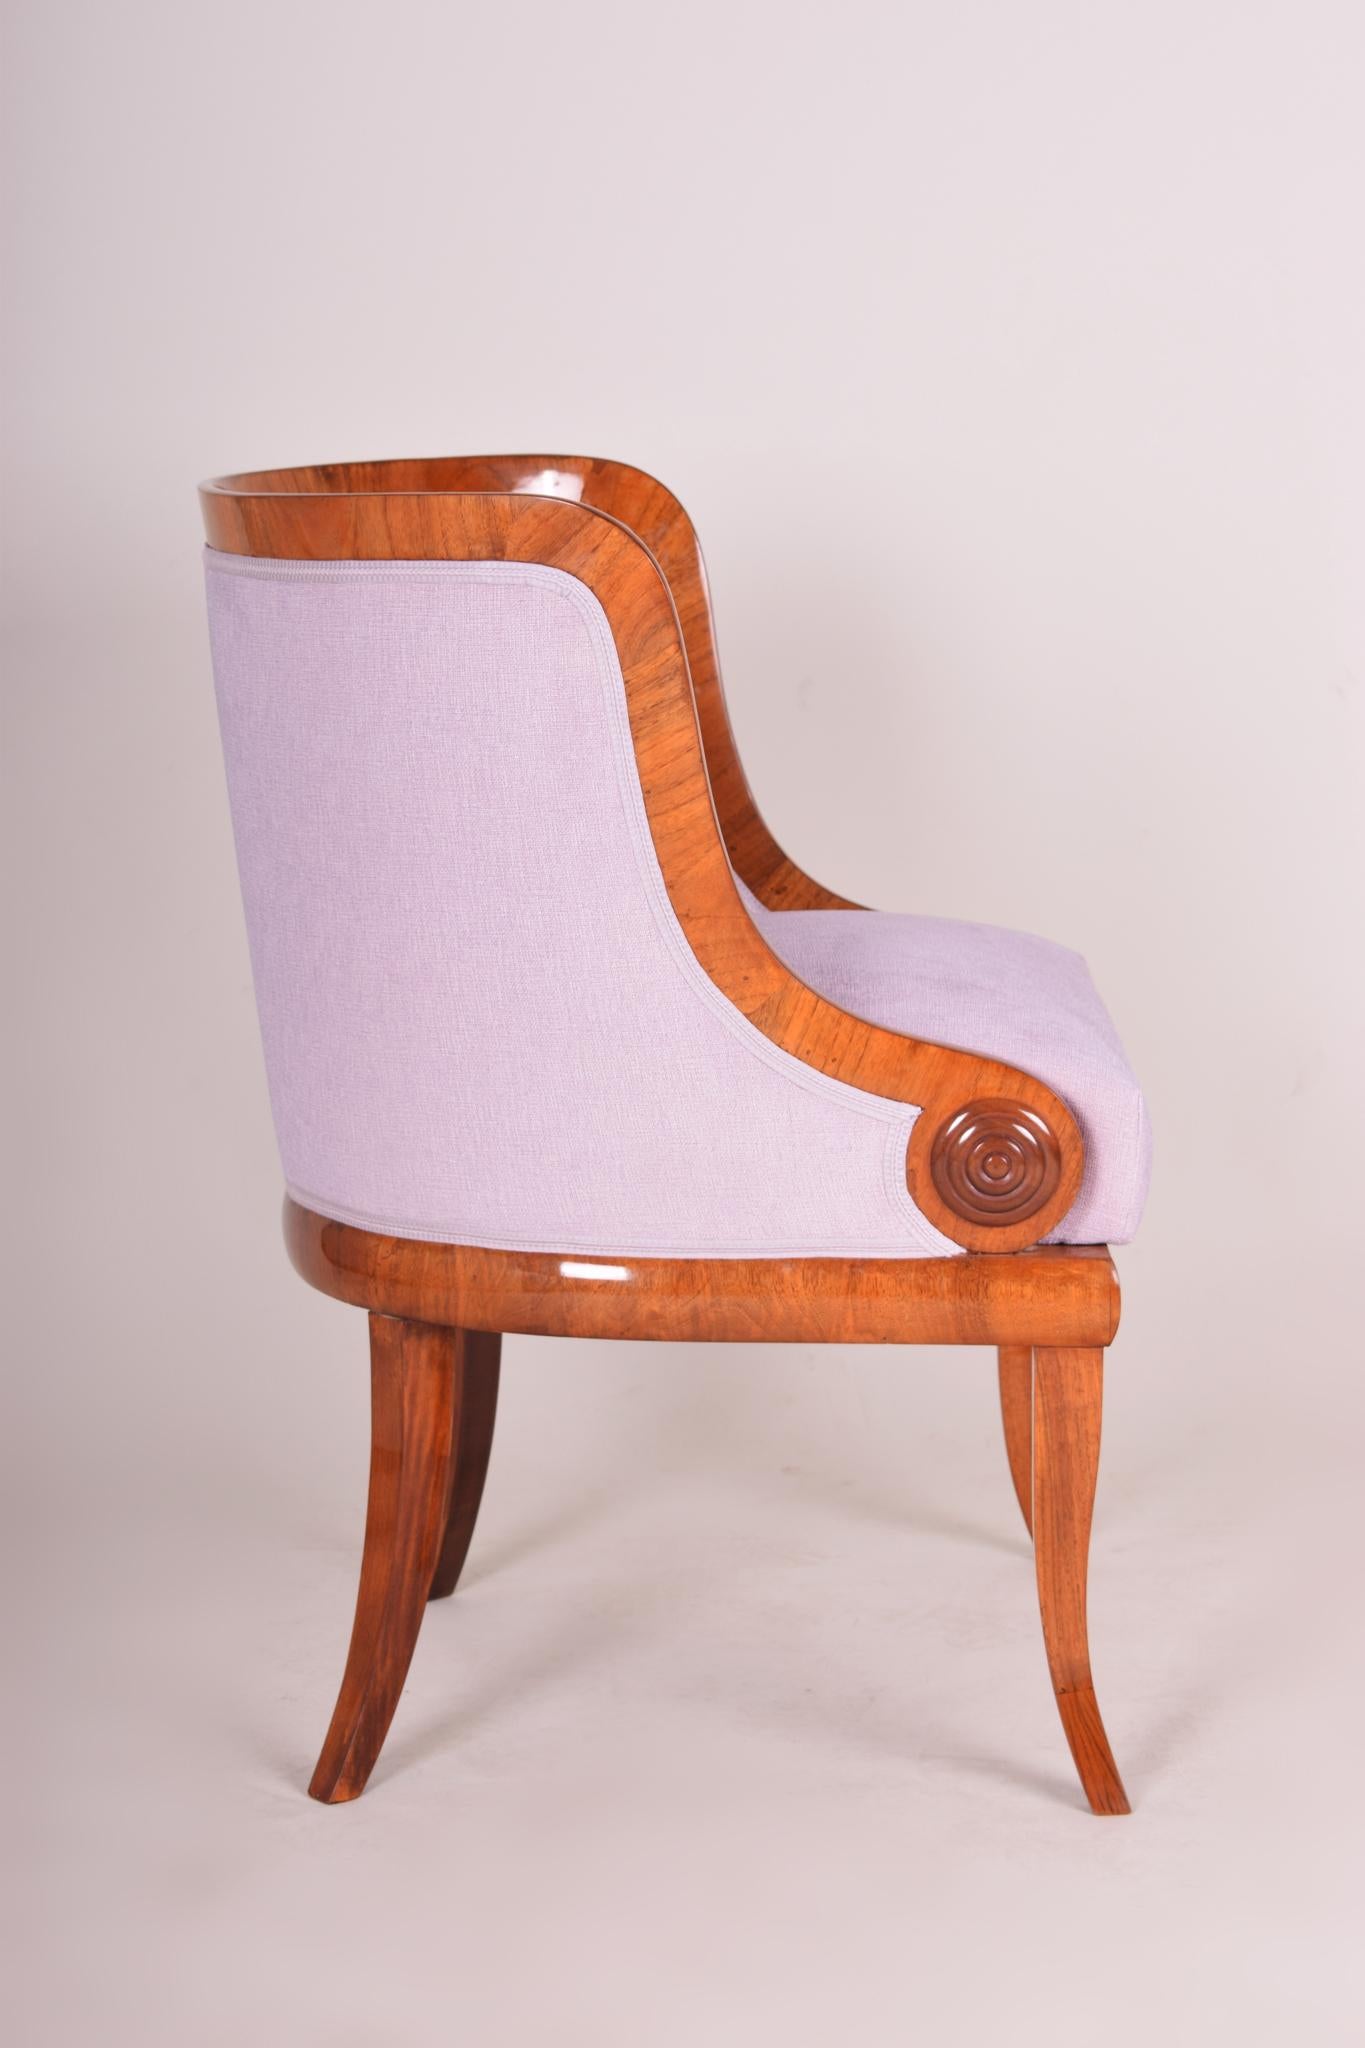 Brown and Pink Bohemian Armchair Made Out of Walnut, 1820s, Biedermeier Style For Sale 1